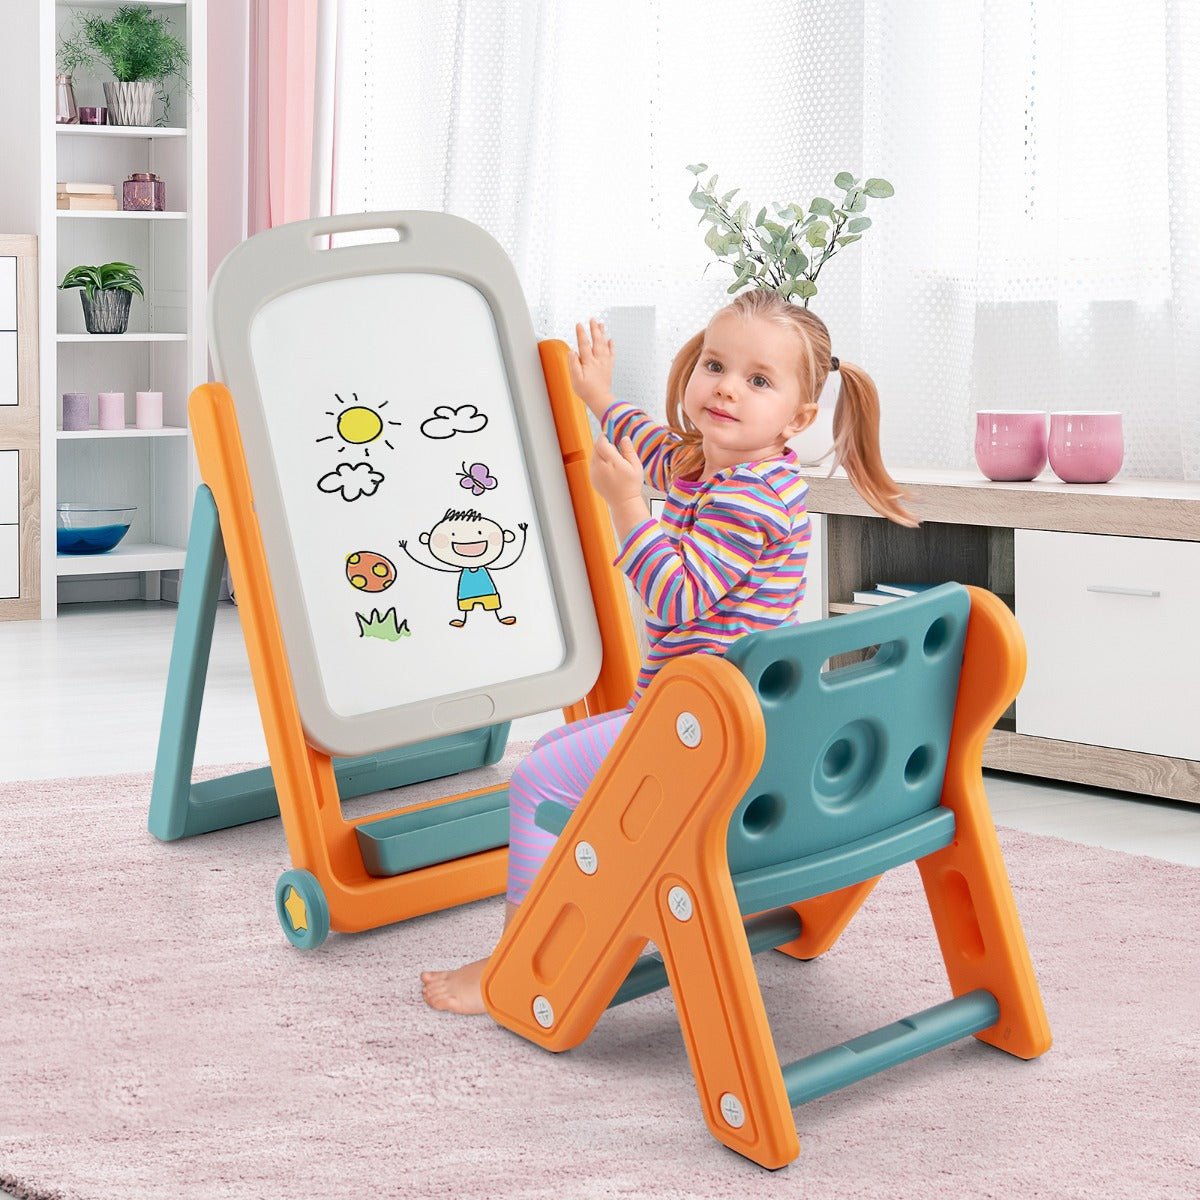 Adjustable Magnetic Whiteboard Easel for Toddlers - Encourage Artistic Exploration